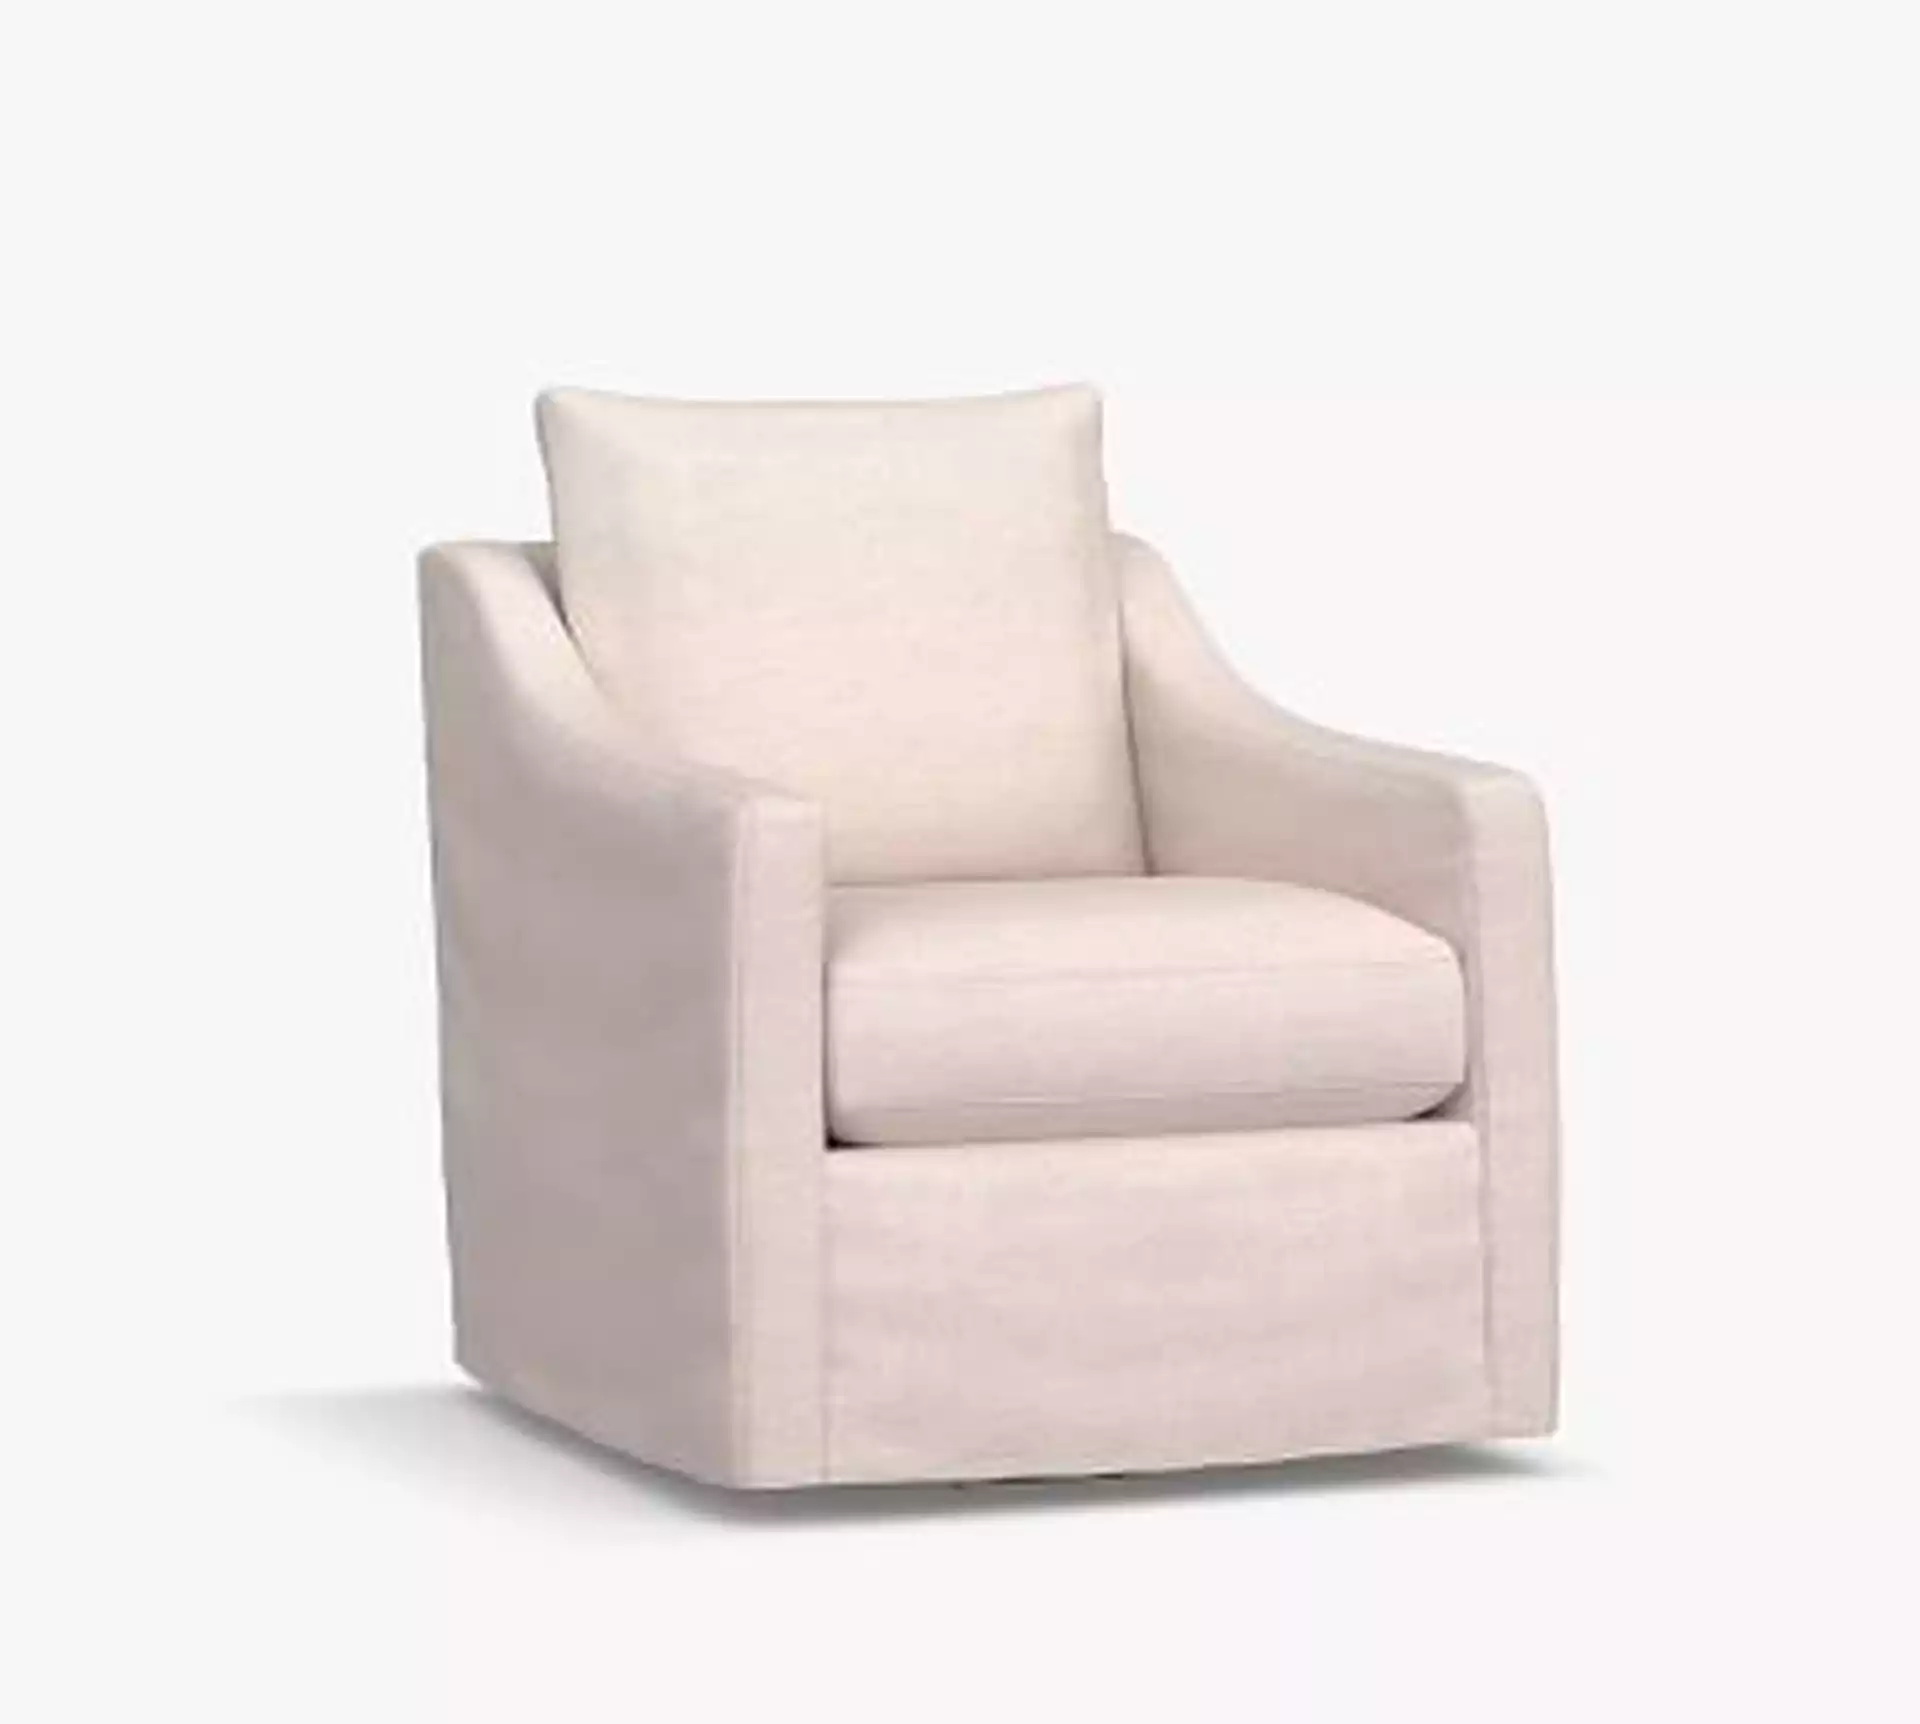 Ayden Slope Arm Slipcovered Swivel Glider, Polyester Wrapped Cushions, Park Weave Ivory